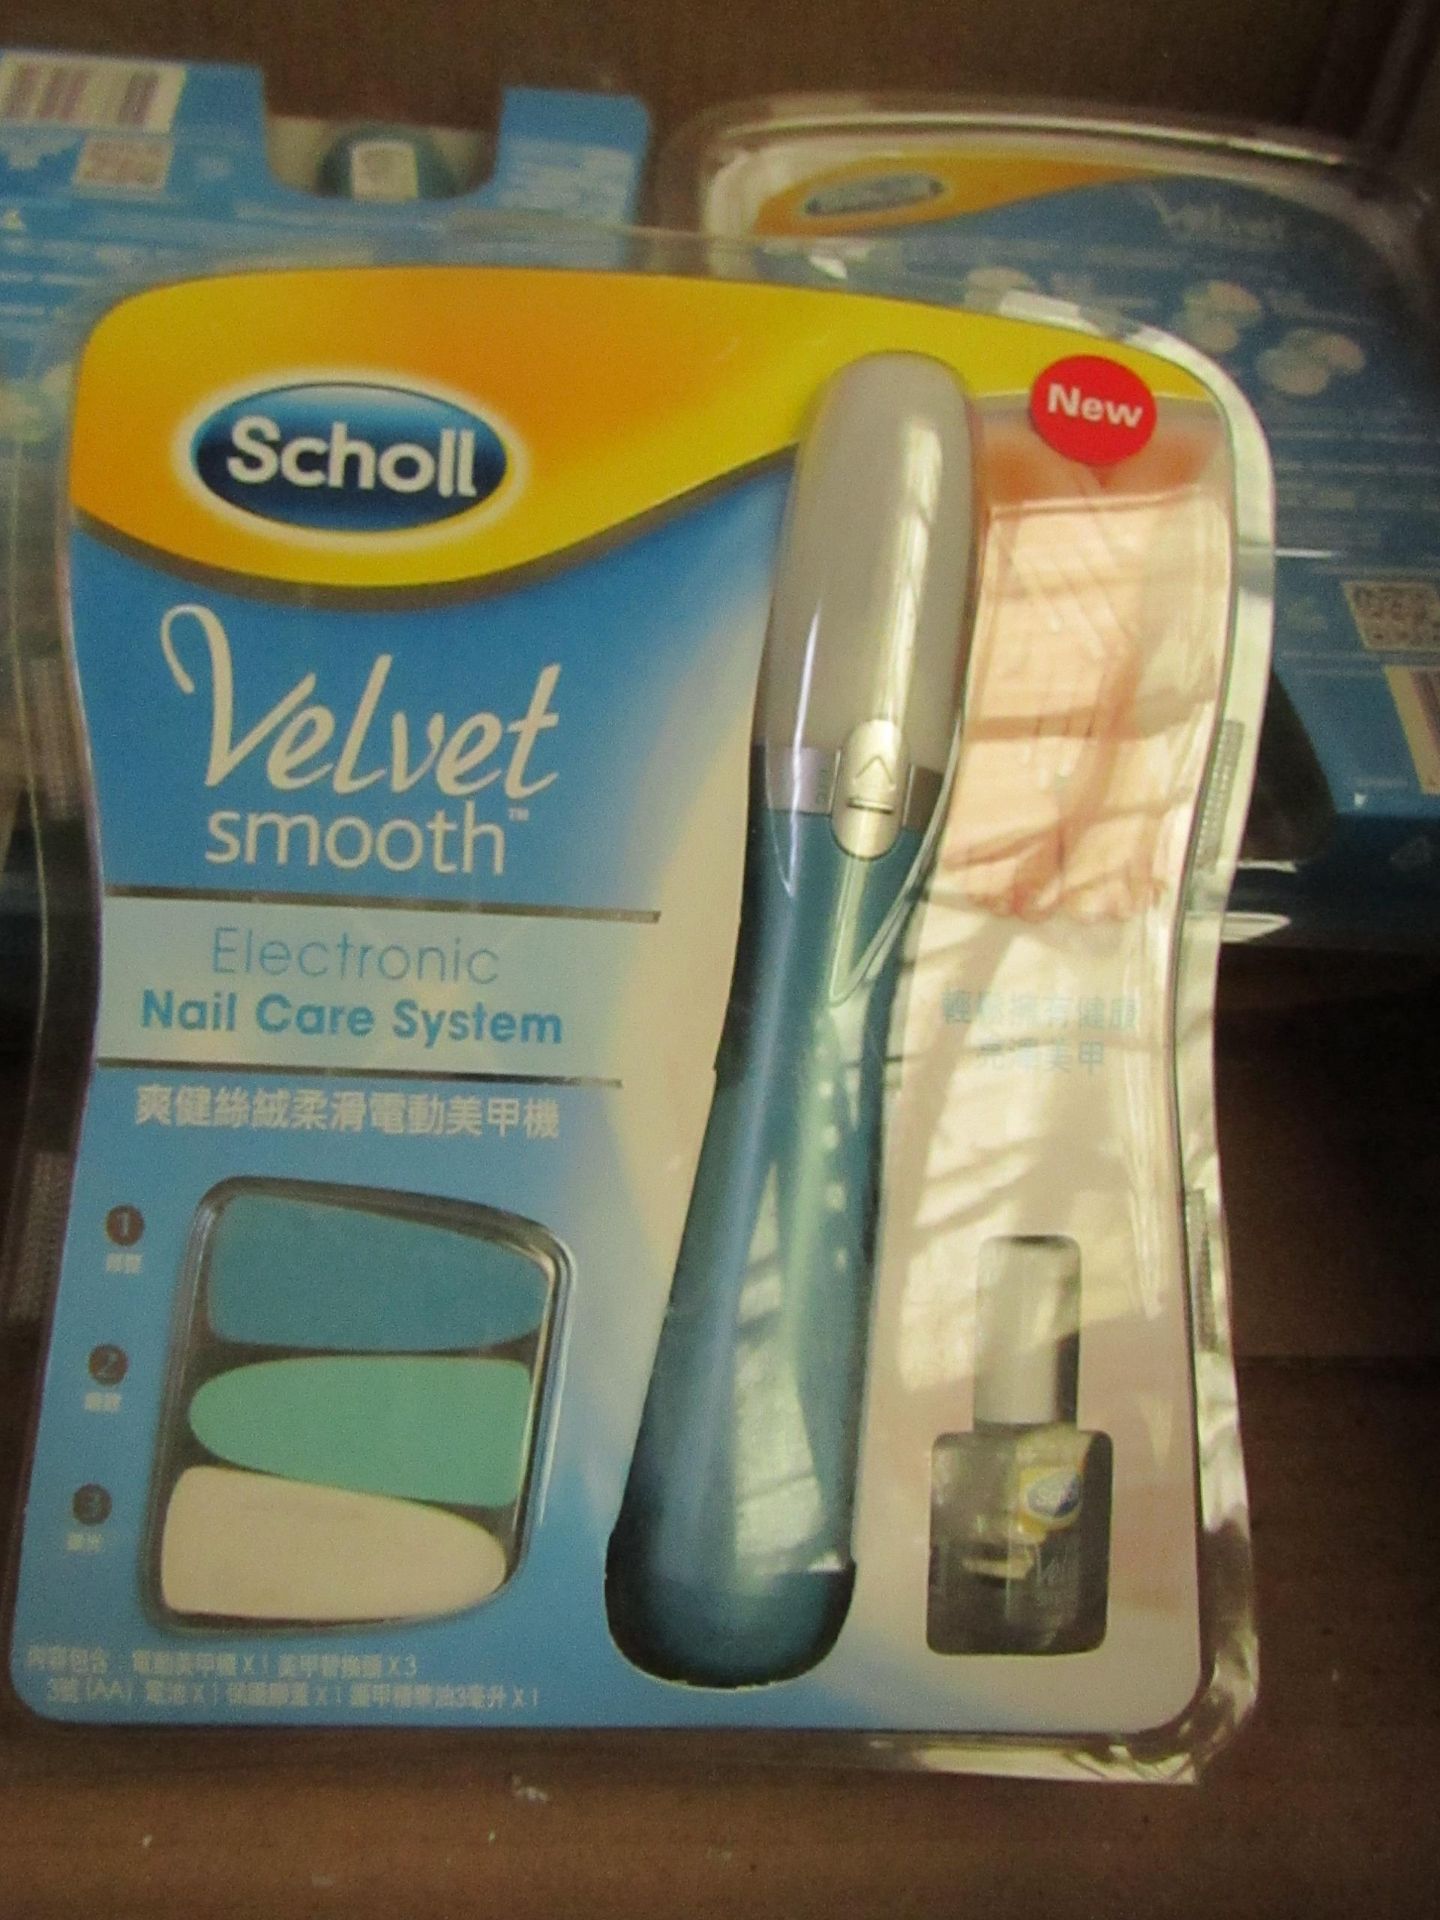 2 x Scholl velvet Smooth Nail care Systems. New & Packaged